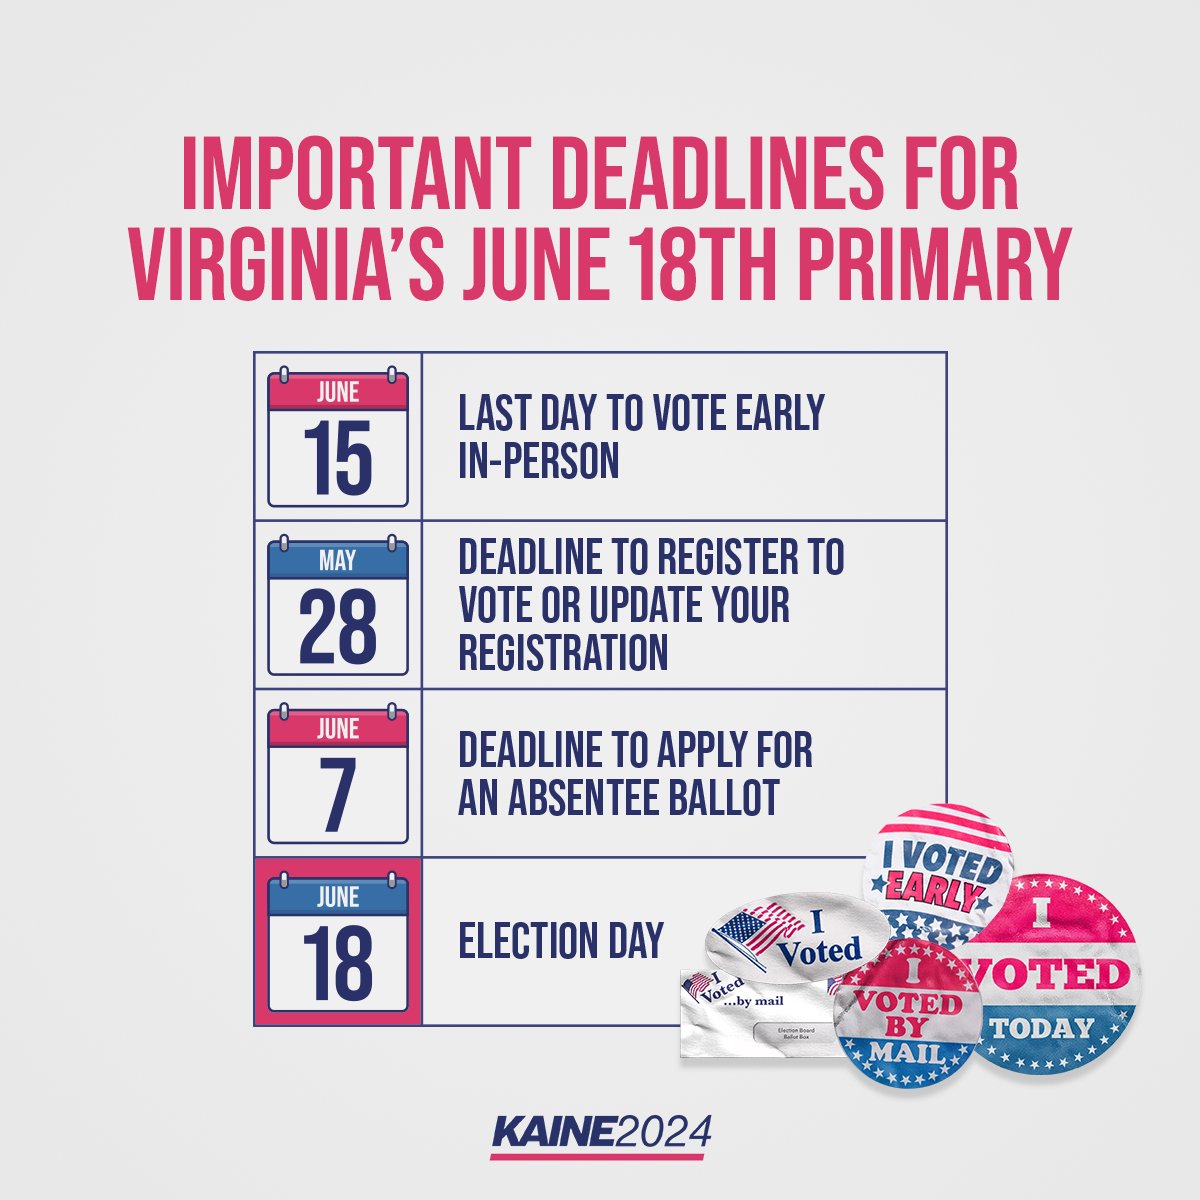 Virginia, the June 18th primary is quickly approaching. Make sure you have a plan to vote. Here are some important deadlines to add to your calendar. Need more help? Go to IWillVote.com/VA